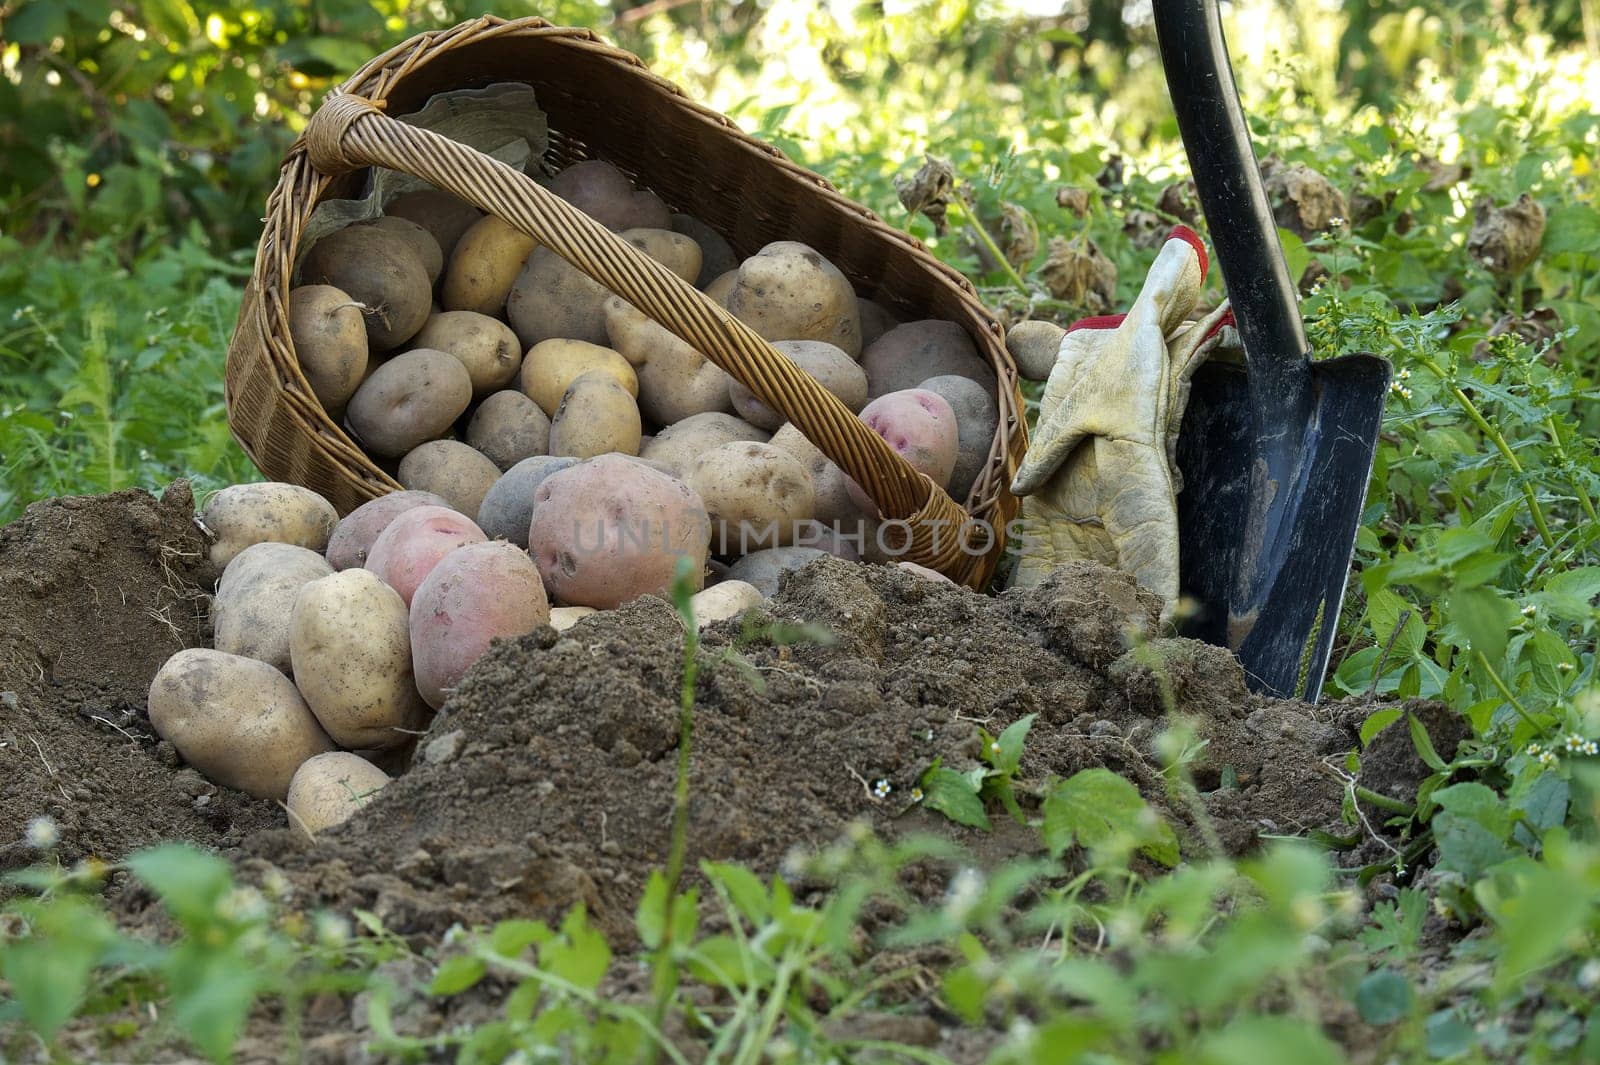 Freshly dug multi-colored potatoes spill out of basket by NetPix